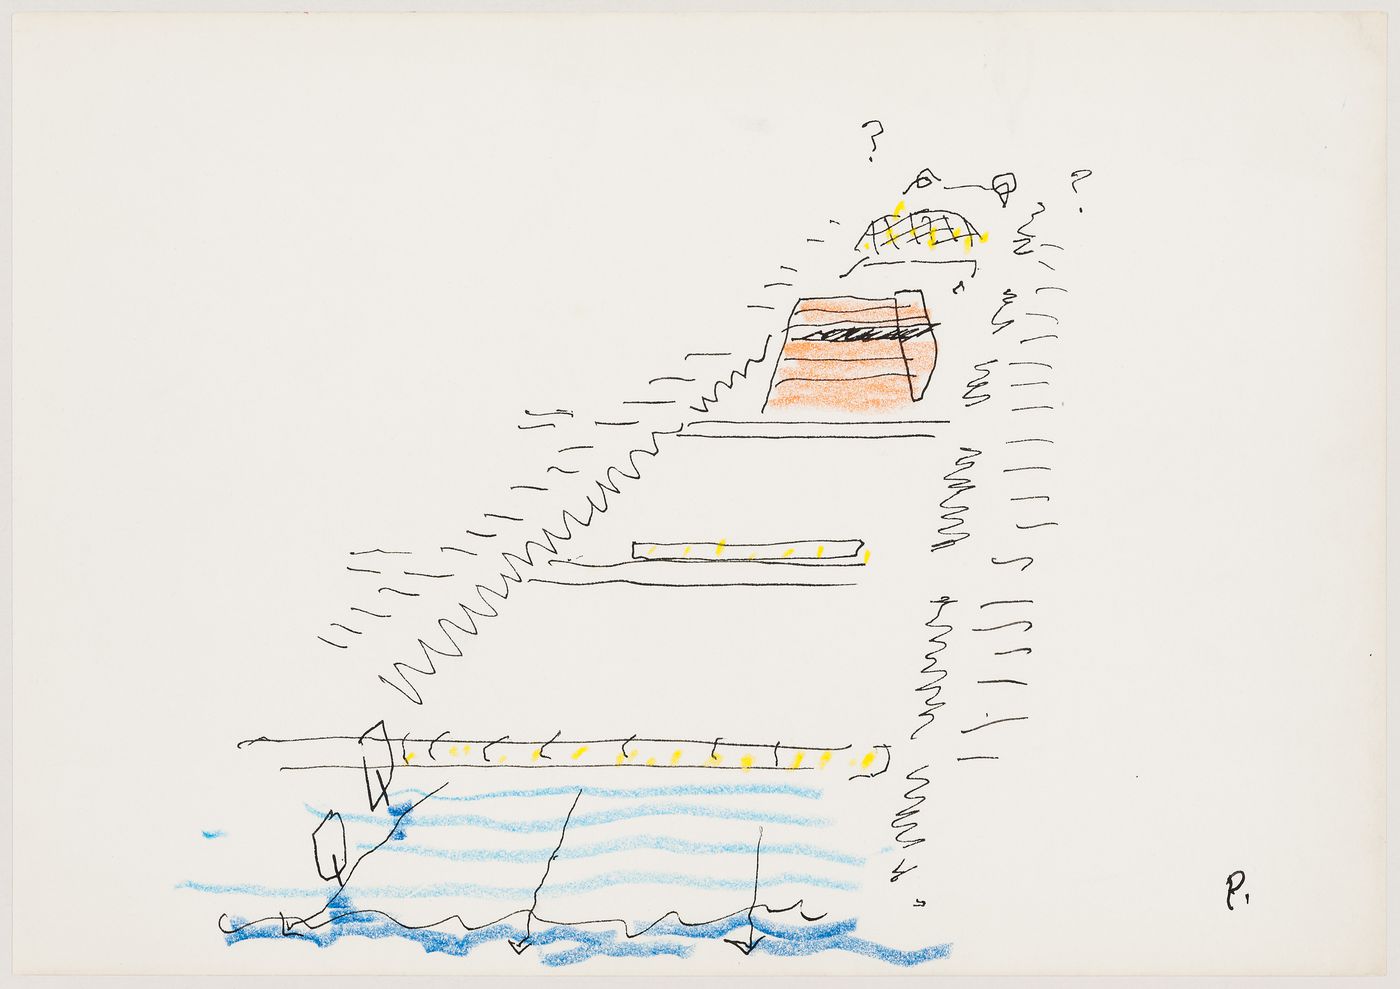 Project by Cedric Price Architects for the IFCCA Prize for the Design of Cities competition: bird's eye perspective sketch of the site looking east from the Hudson River (document from the IFPRI project records)